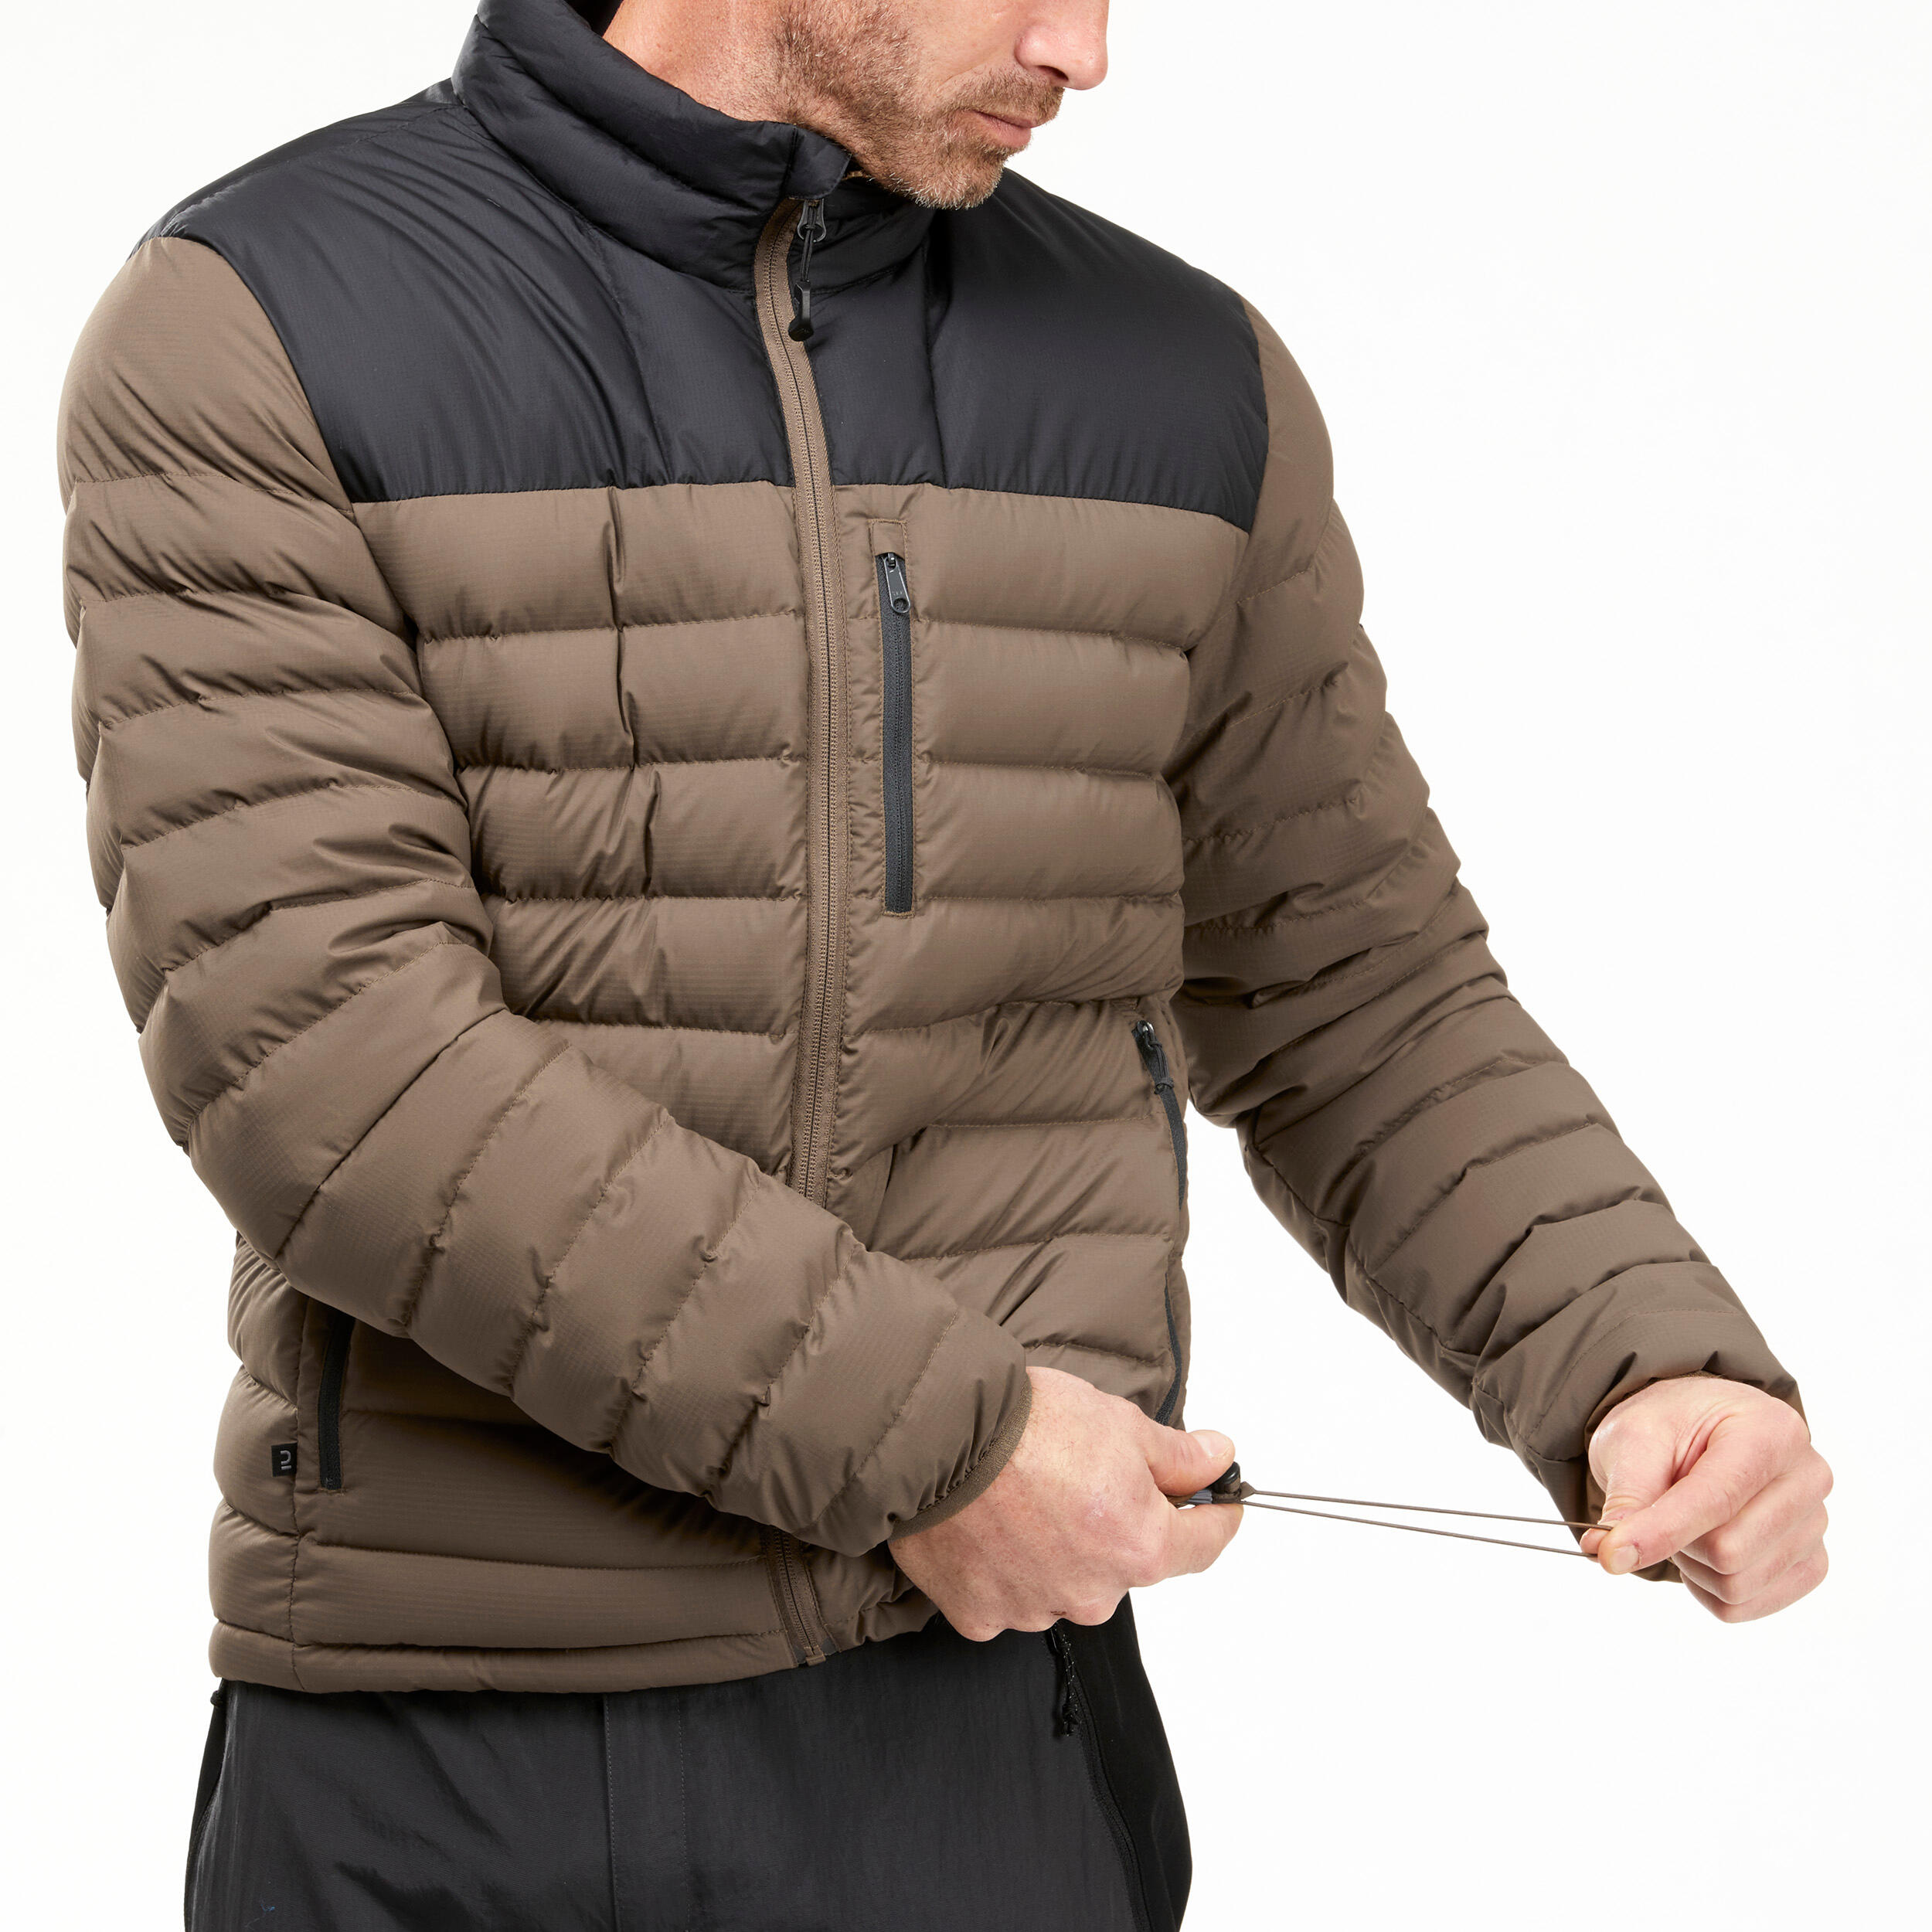 Decathlon Sports India - NewTown - PRICE DROP!!!! Grab our MT100 padded  jacket at ₹1999, which is light and compact, ideal for city chills and  chilly hills- https://bit.ly/3gHK5az This hooded padded jacket